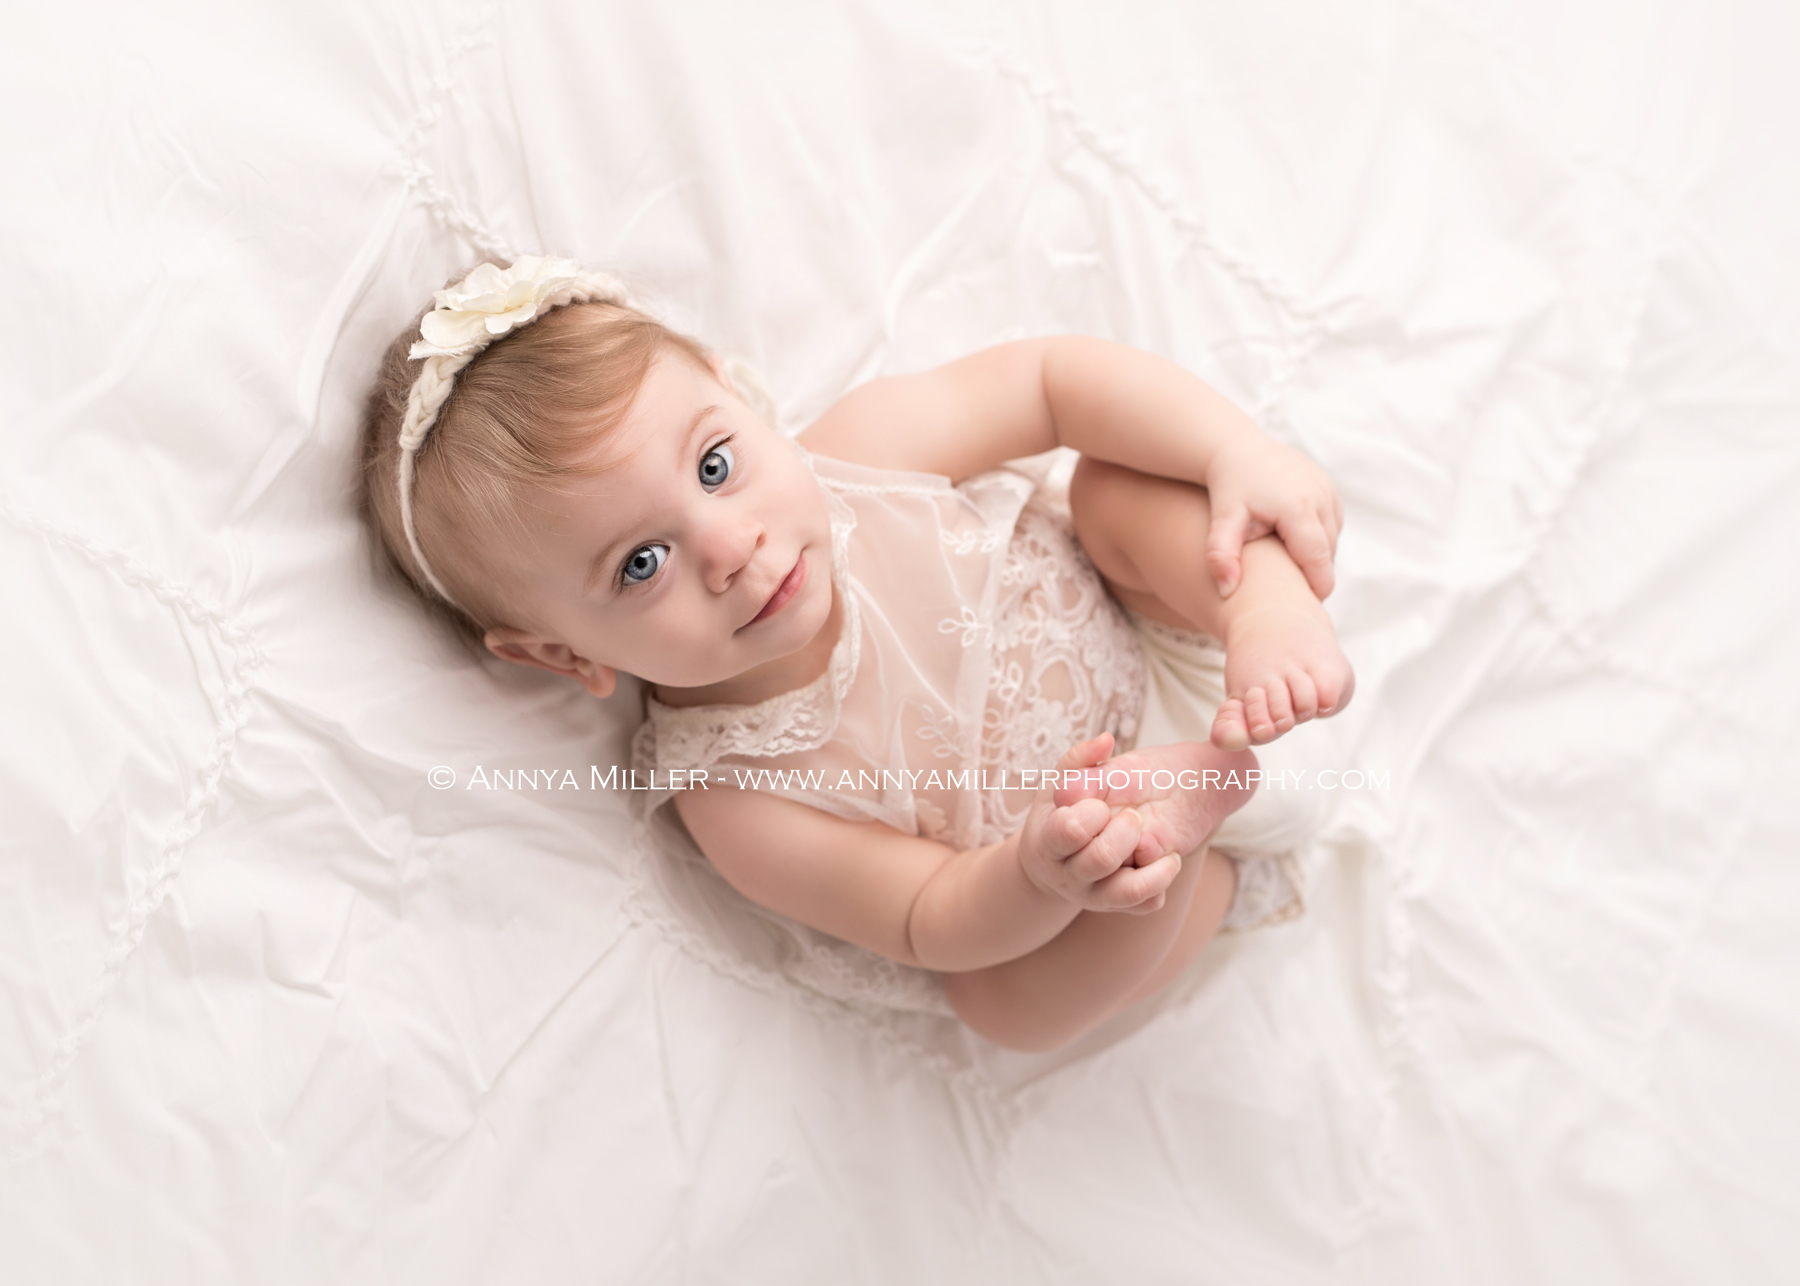 Photograph of baby girl on a white bed by Pickering photographer Annya Miller